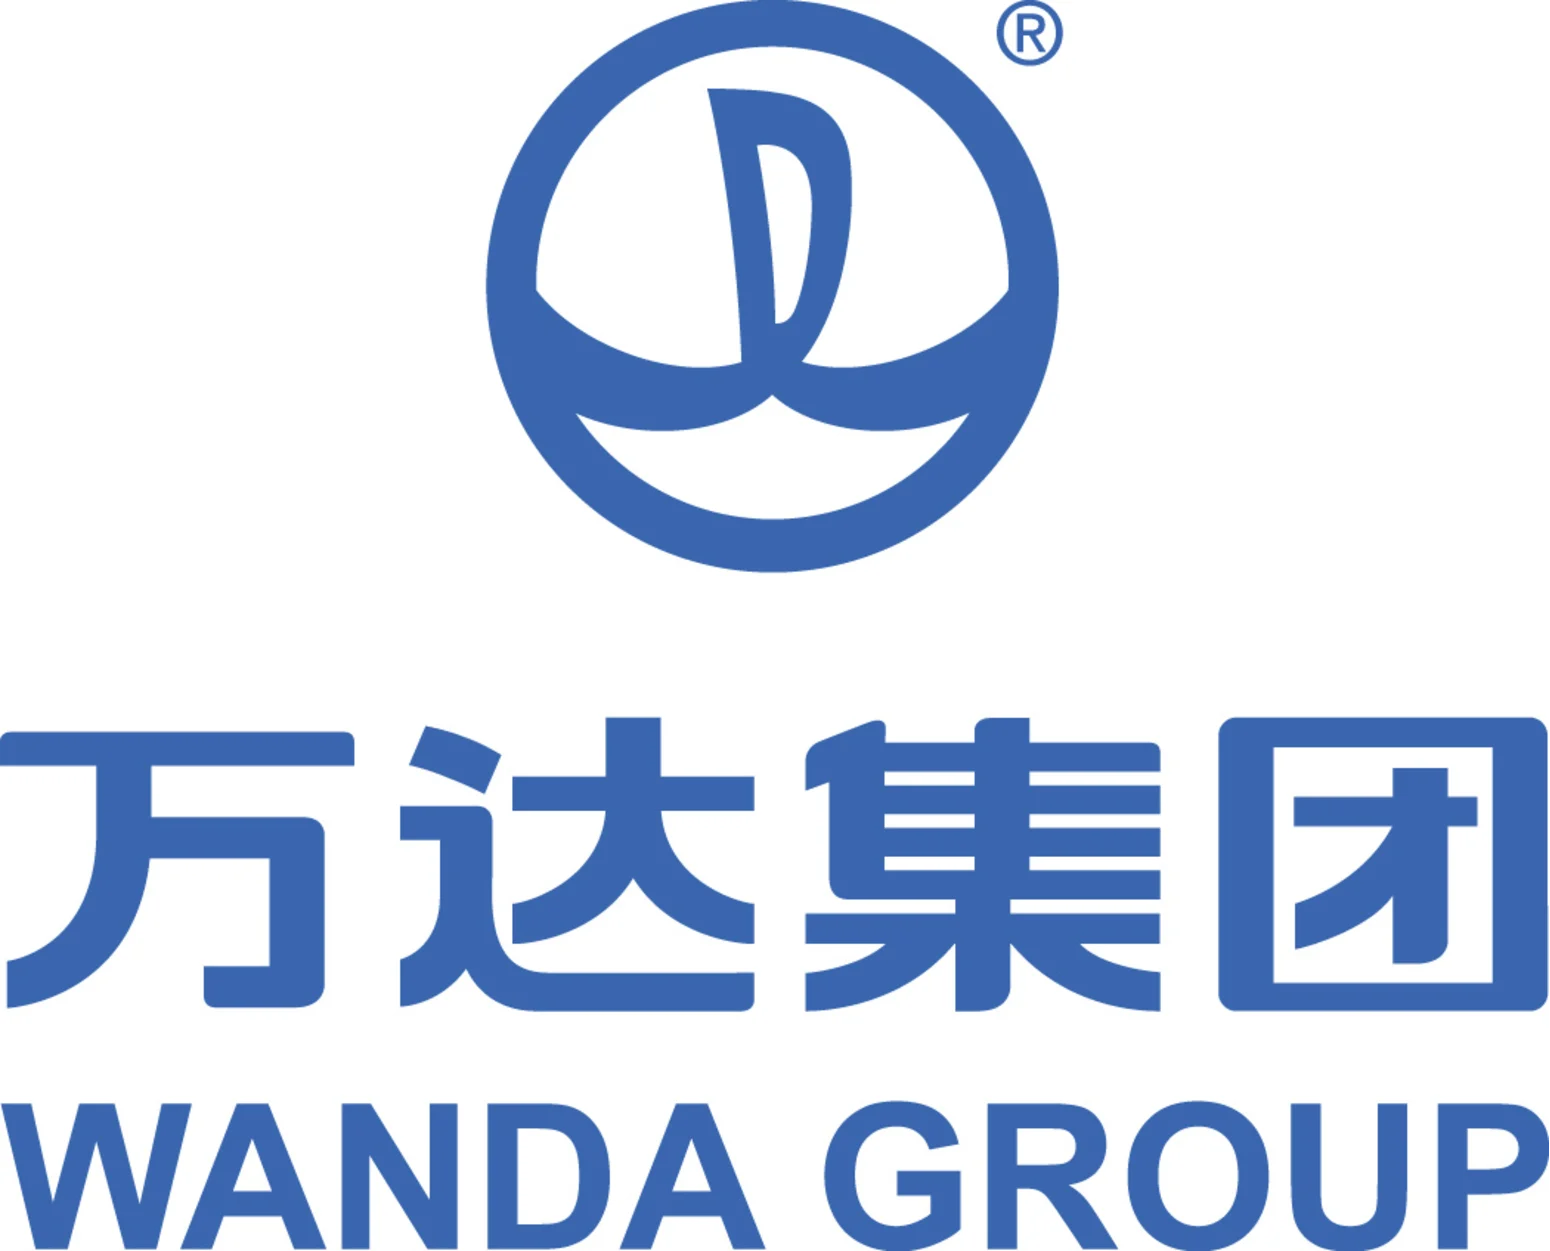 Wanda Group acquires Infront Sports and Media from Bridgepoint